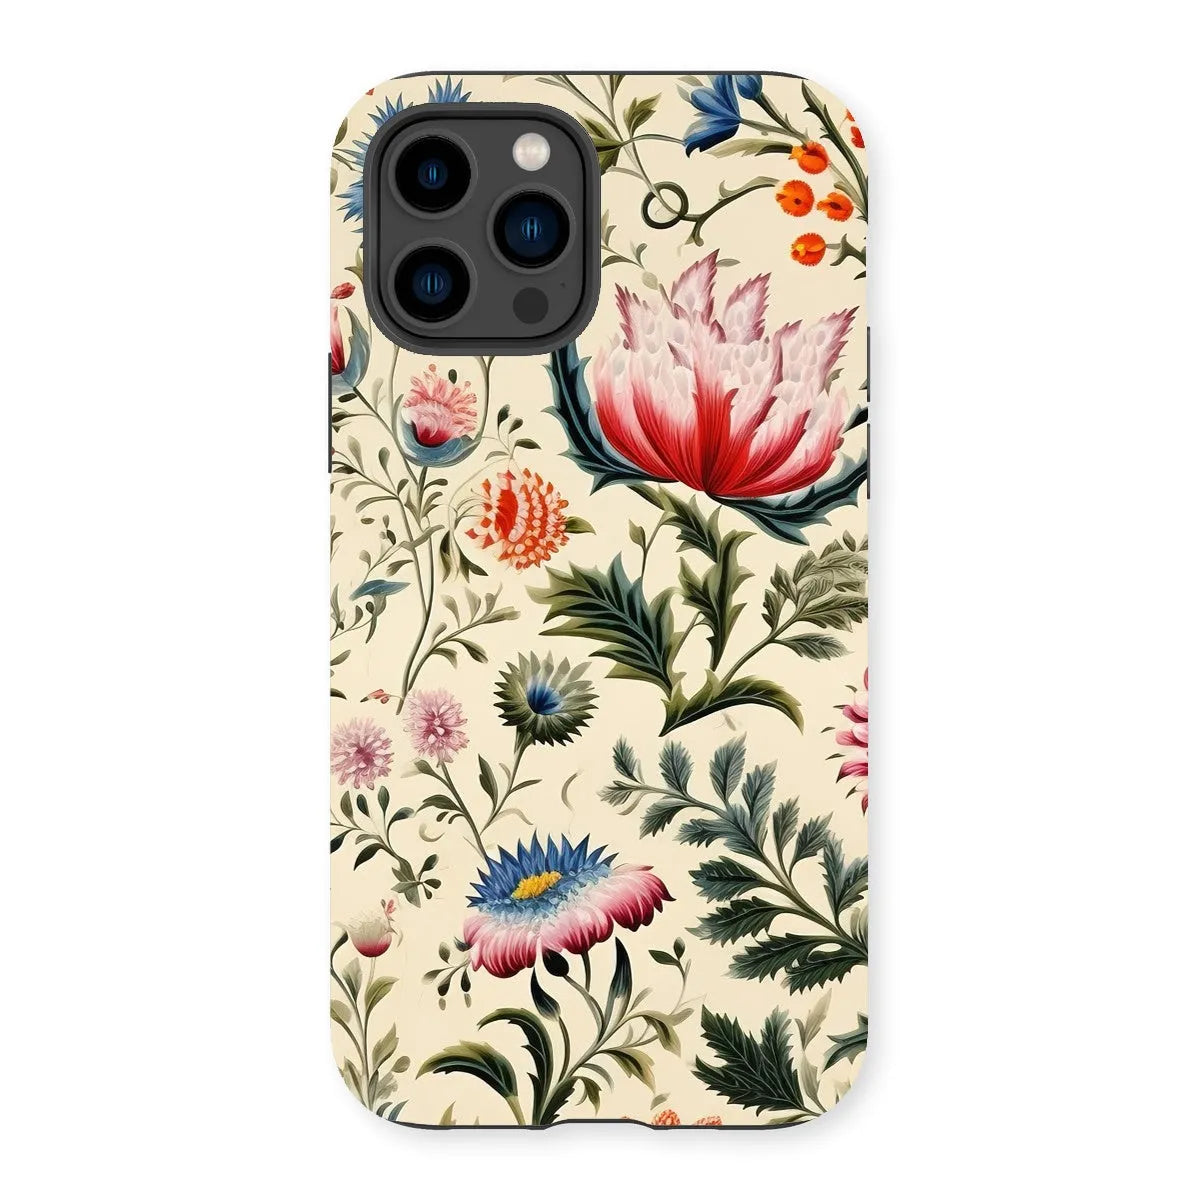 Wildflower Hoopla - Floral Garden Aesthetic Phone Case - Iphone 14 Pro / Matte - Mobile Phone Cases - Aesthetic Art